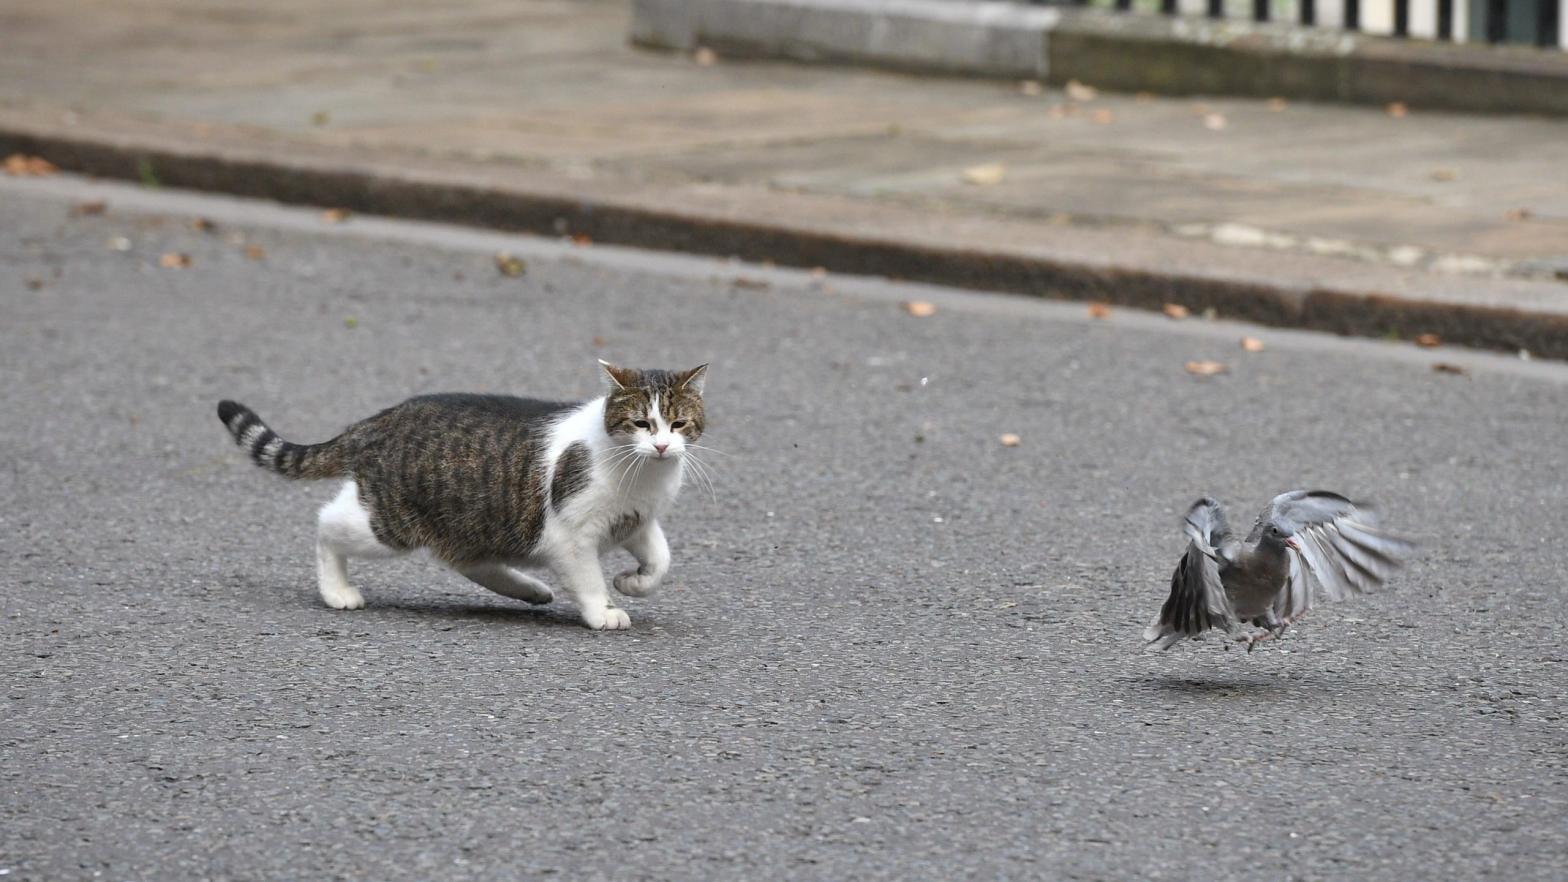 Larry, 10 Downing Street's cat, chasing a pigeon.  (Photo: Leon Neal, Getty Images)